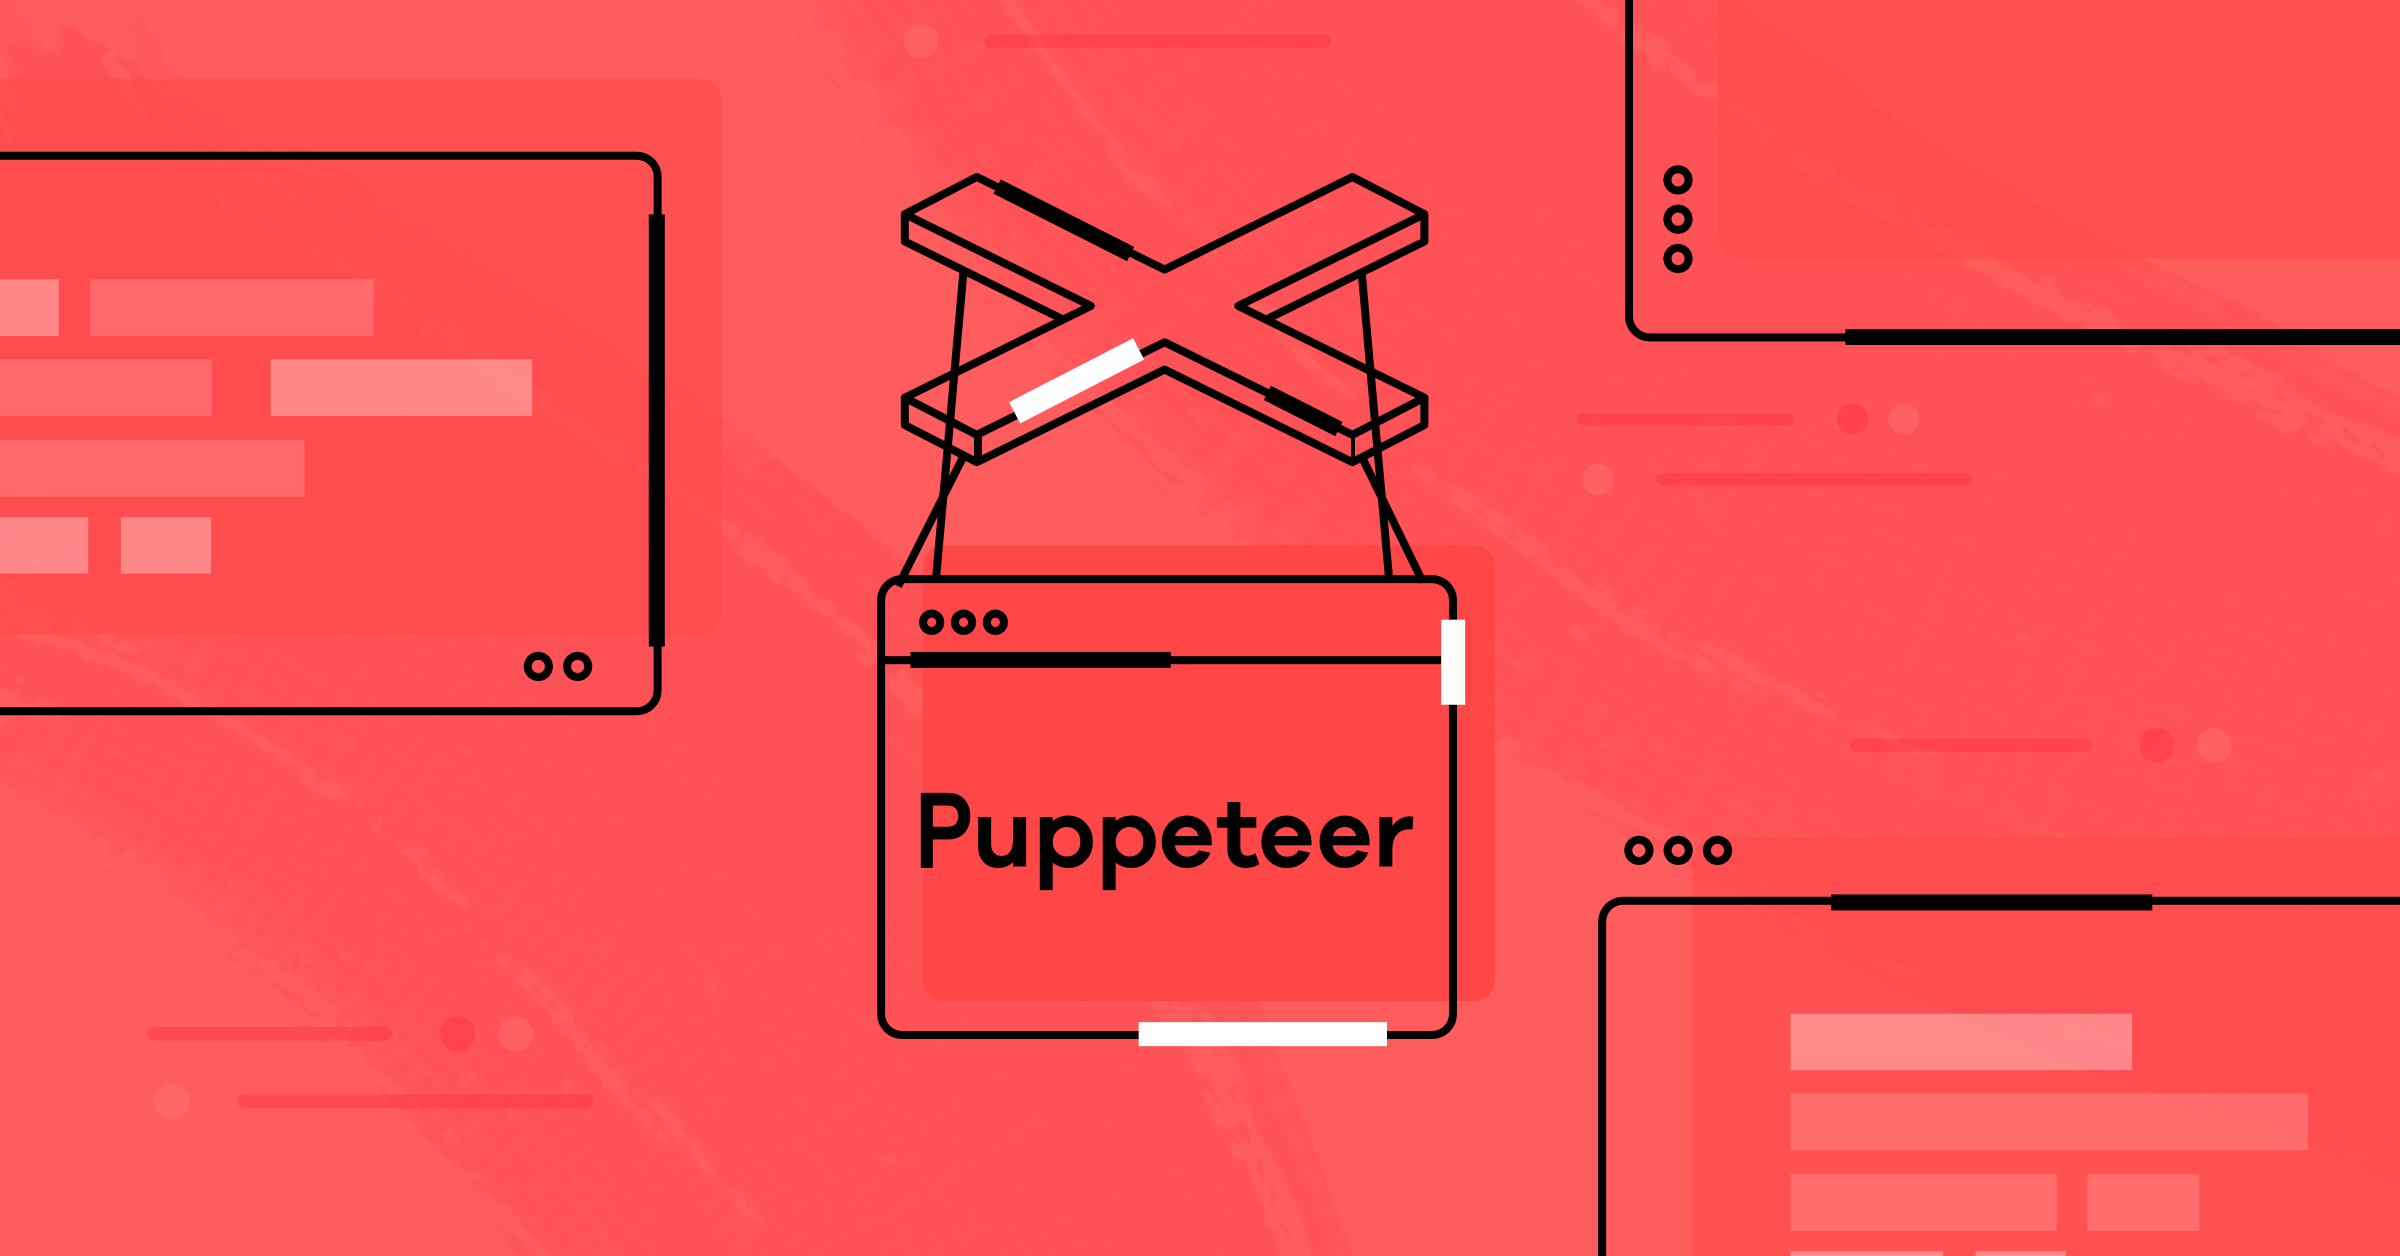 Puppeteer tutorial: how to submit forms and click buttons